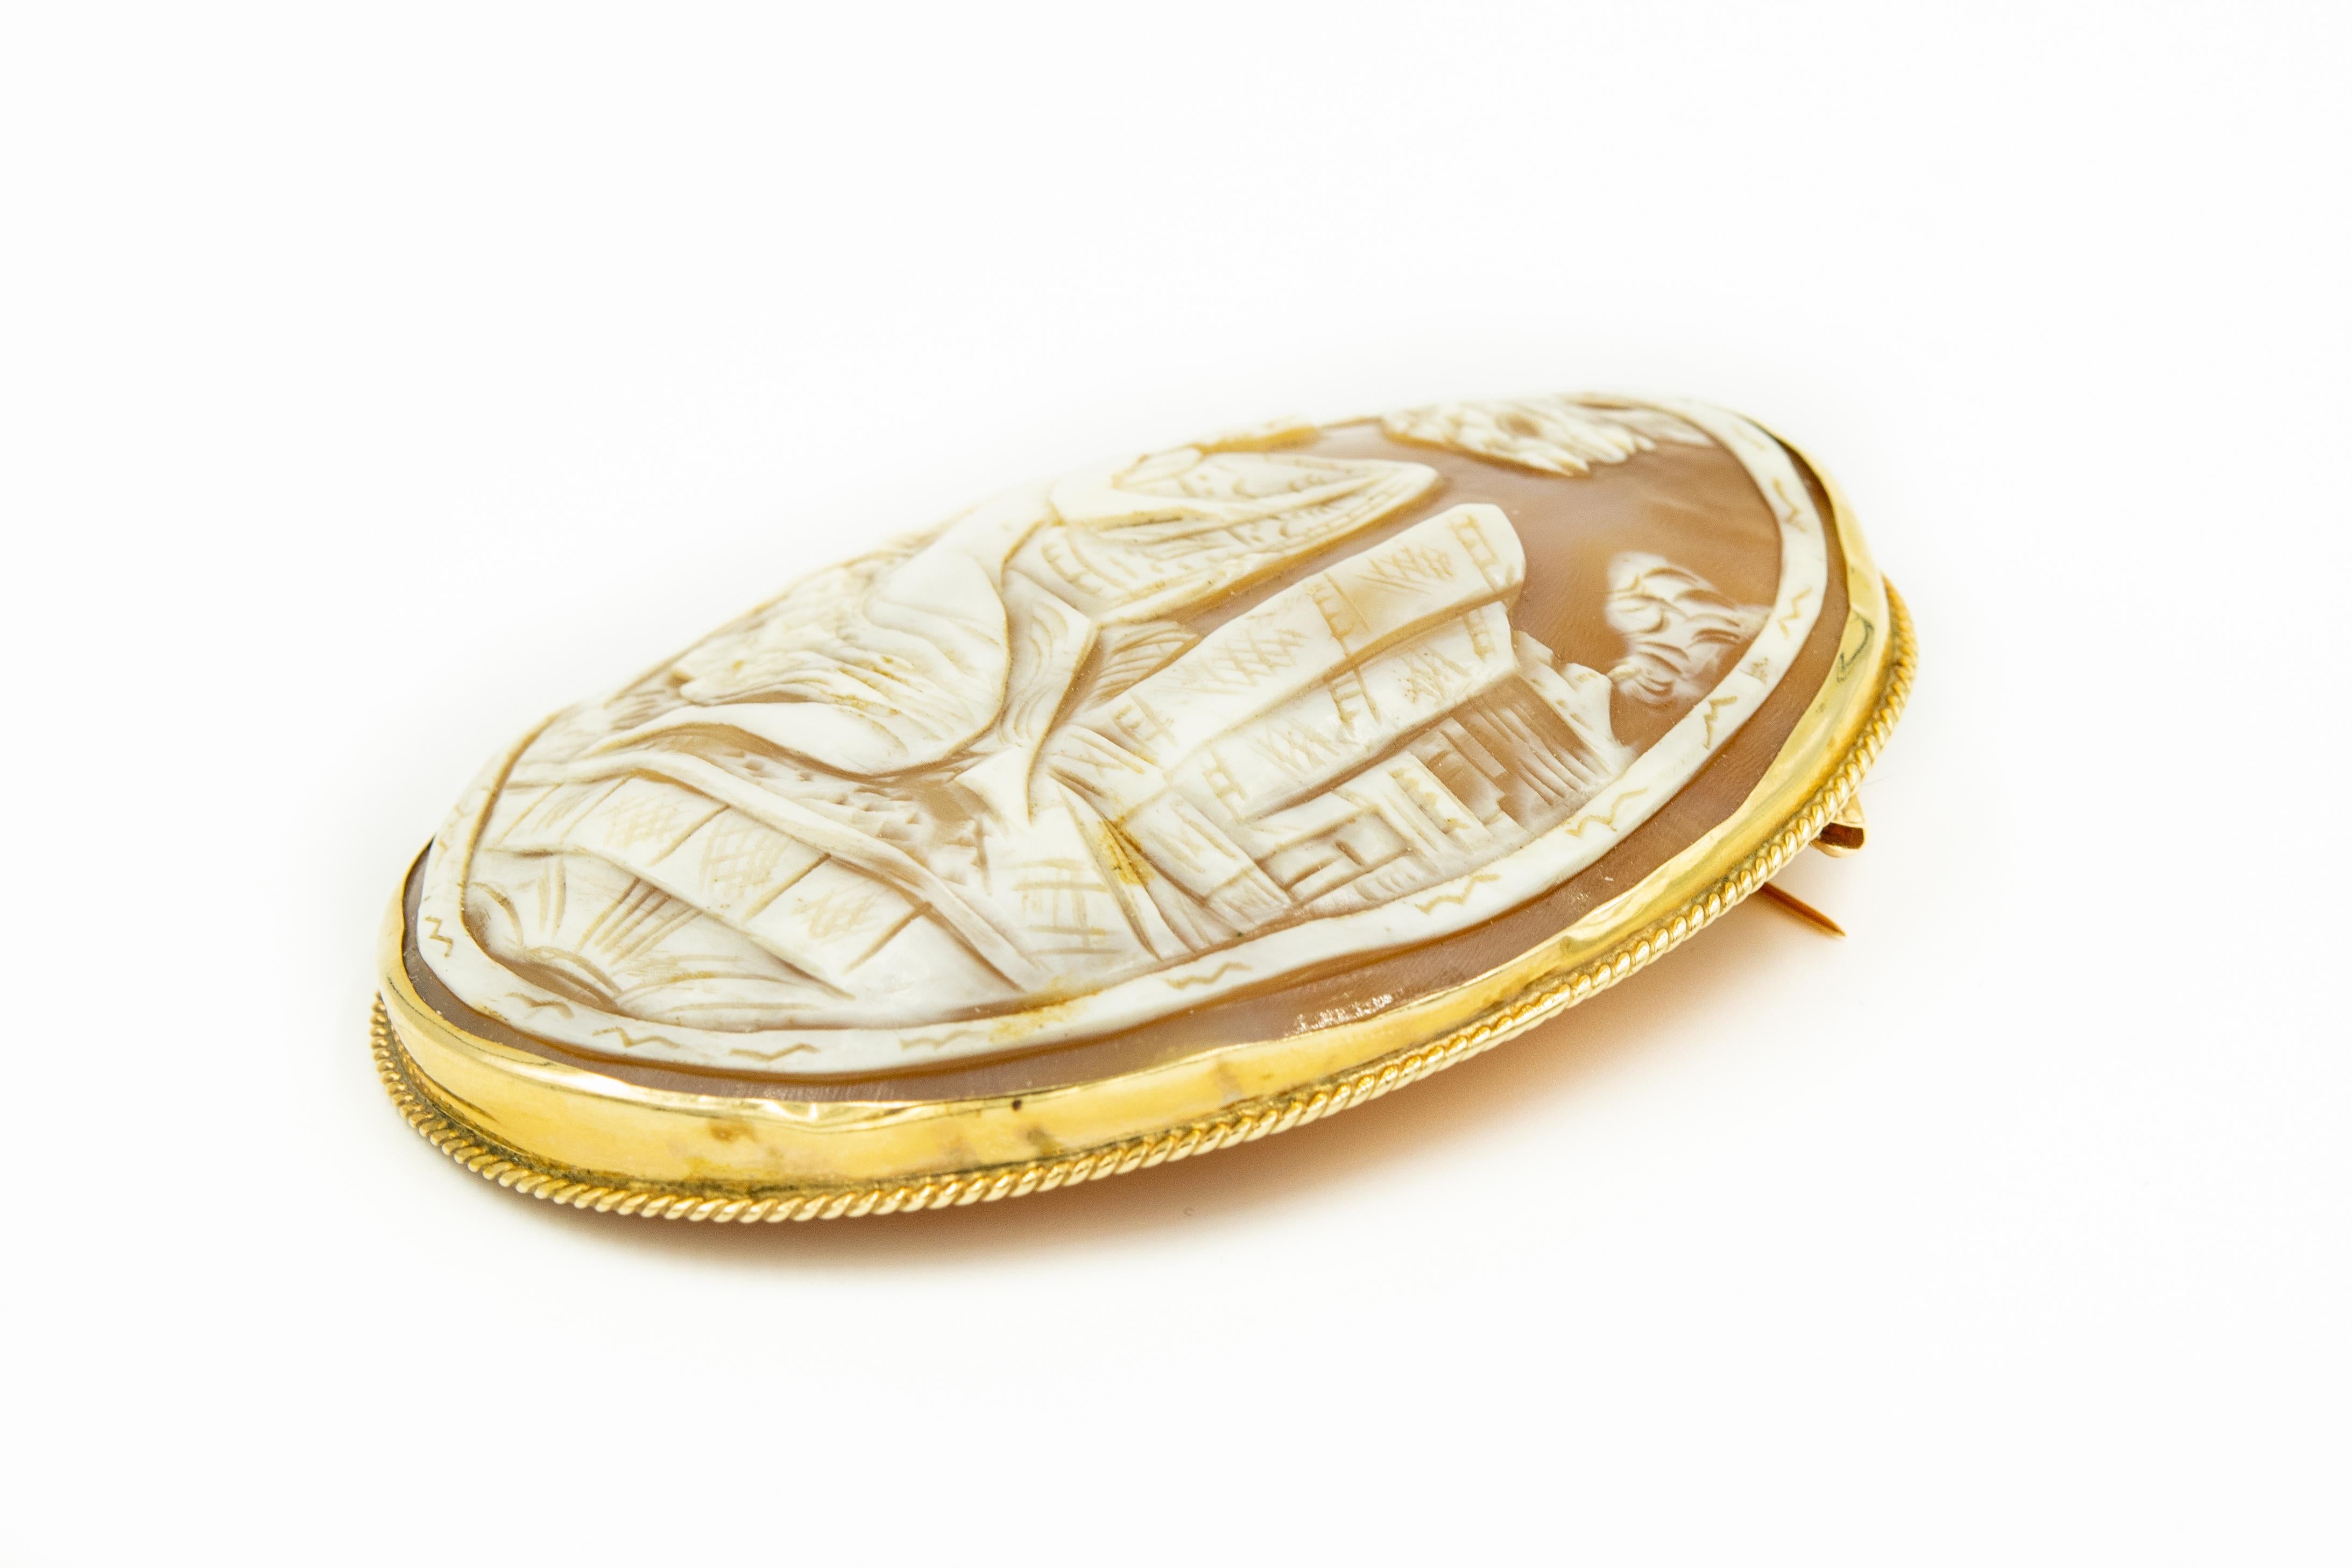 Large Neoclassical Shell Cameo of Woman Painting Gold Brooch Pendant In Good Condition For Sale In Miami Beach, FL